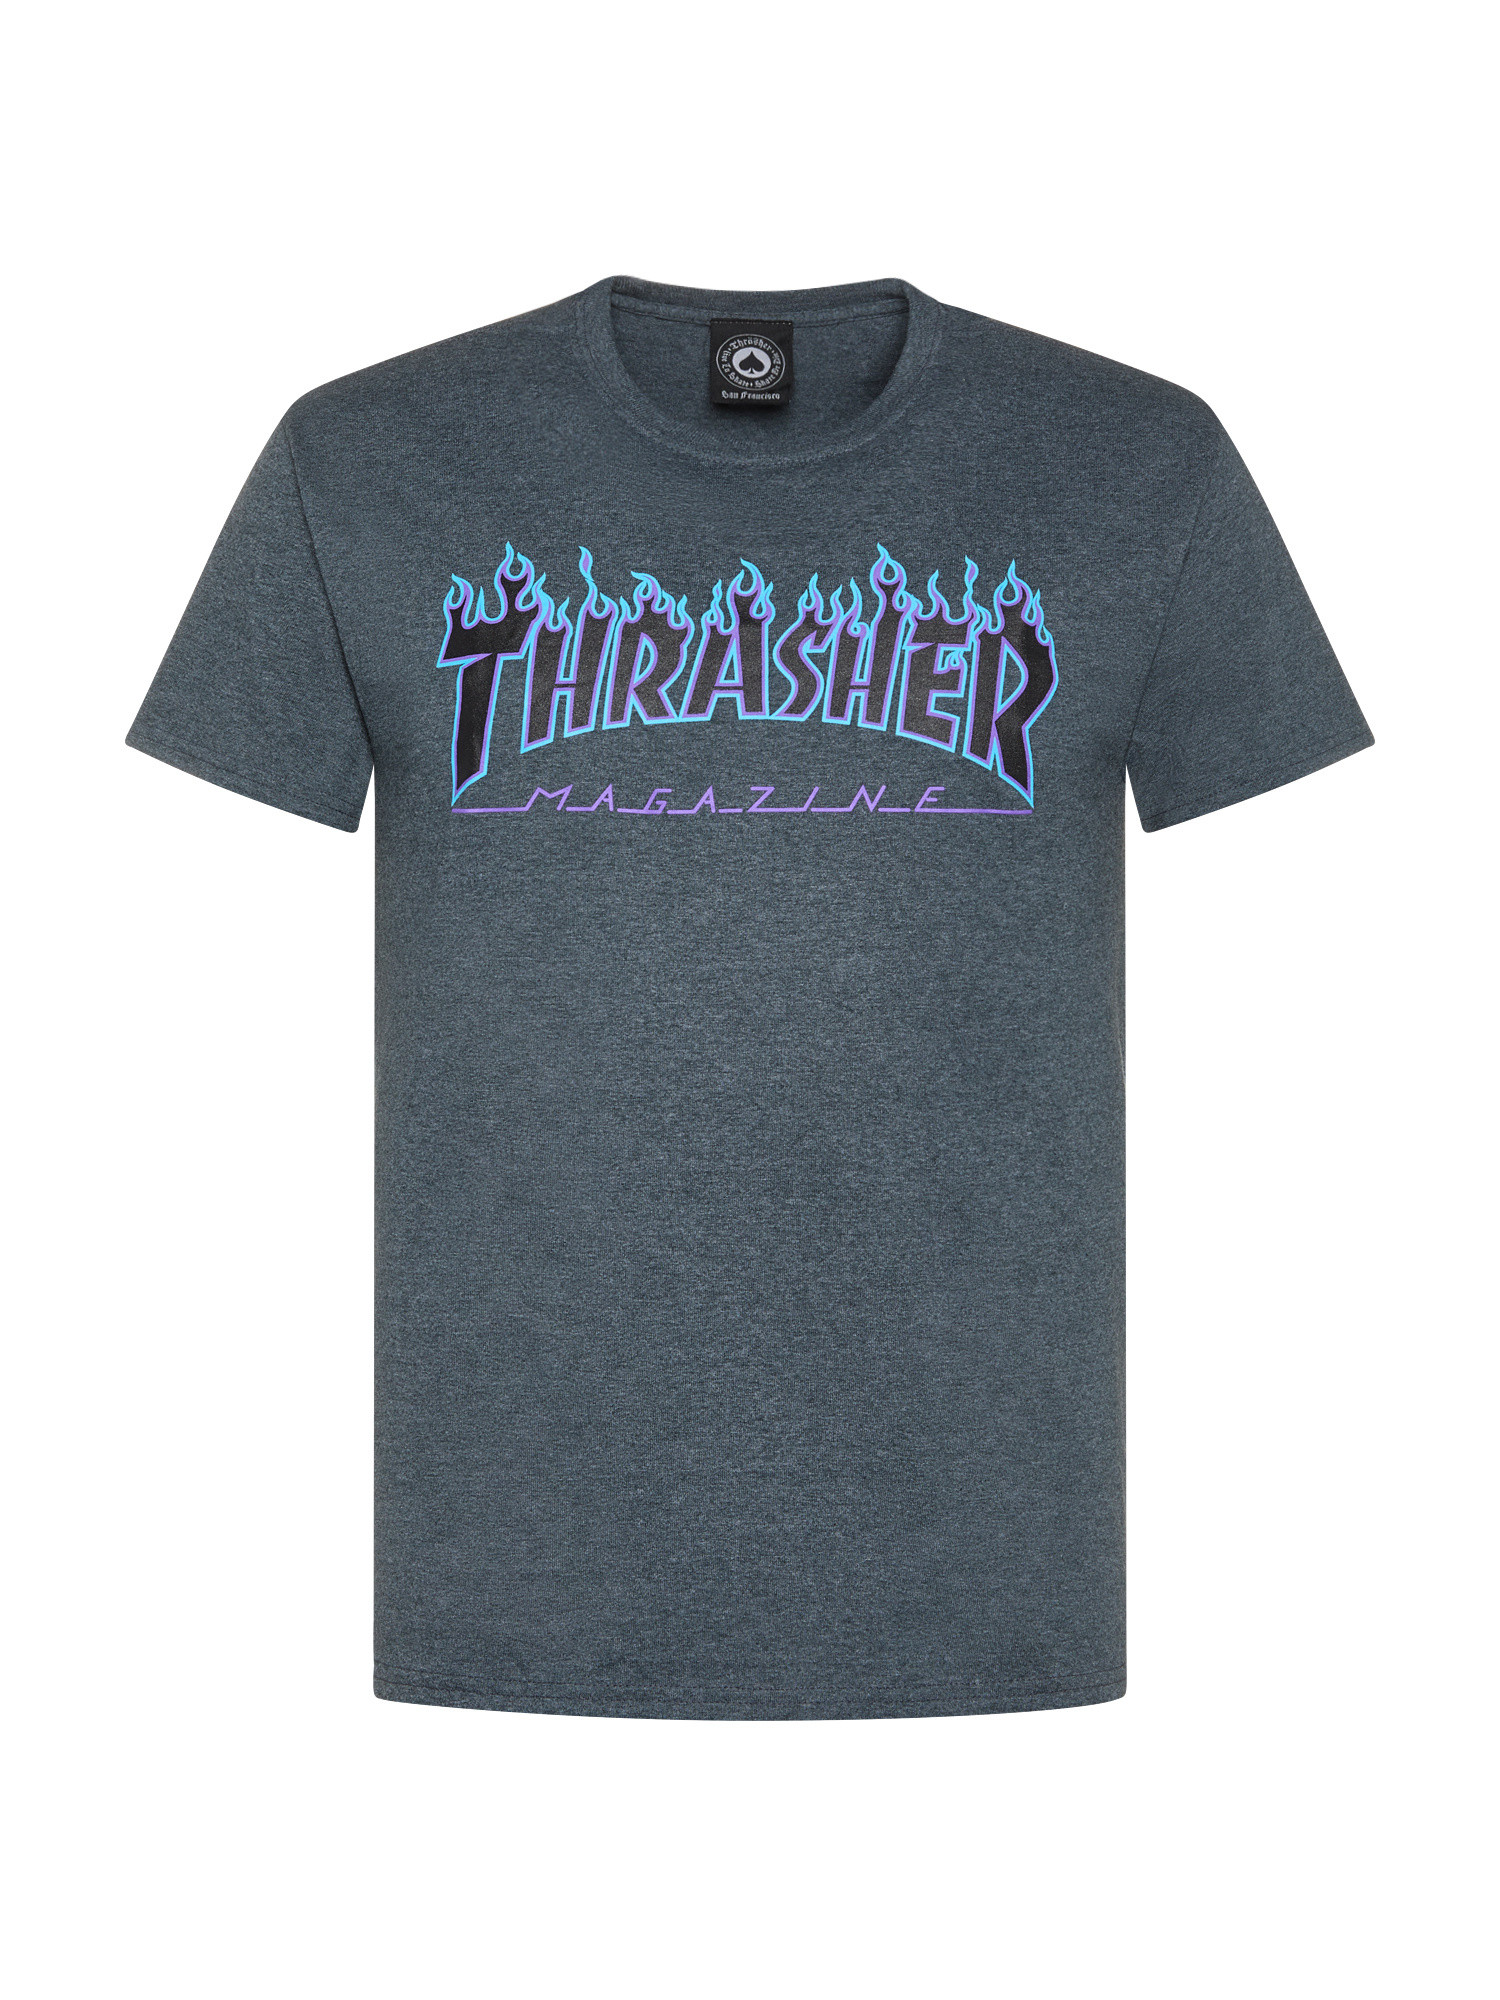 Thrasher - T-Shirt logo fiamme, Grigio scuro, large image number 0